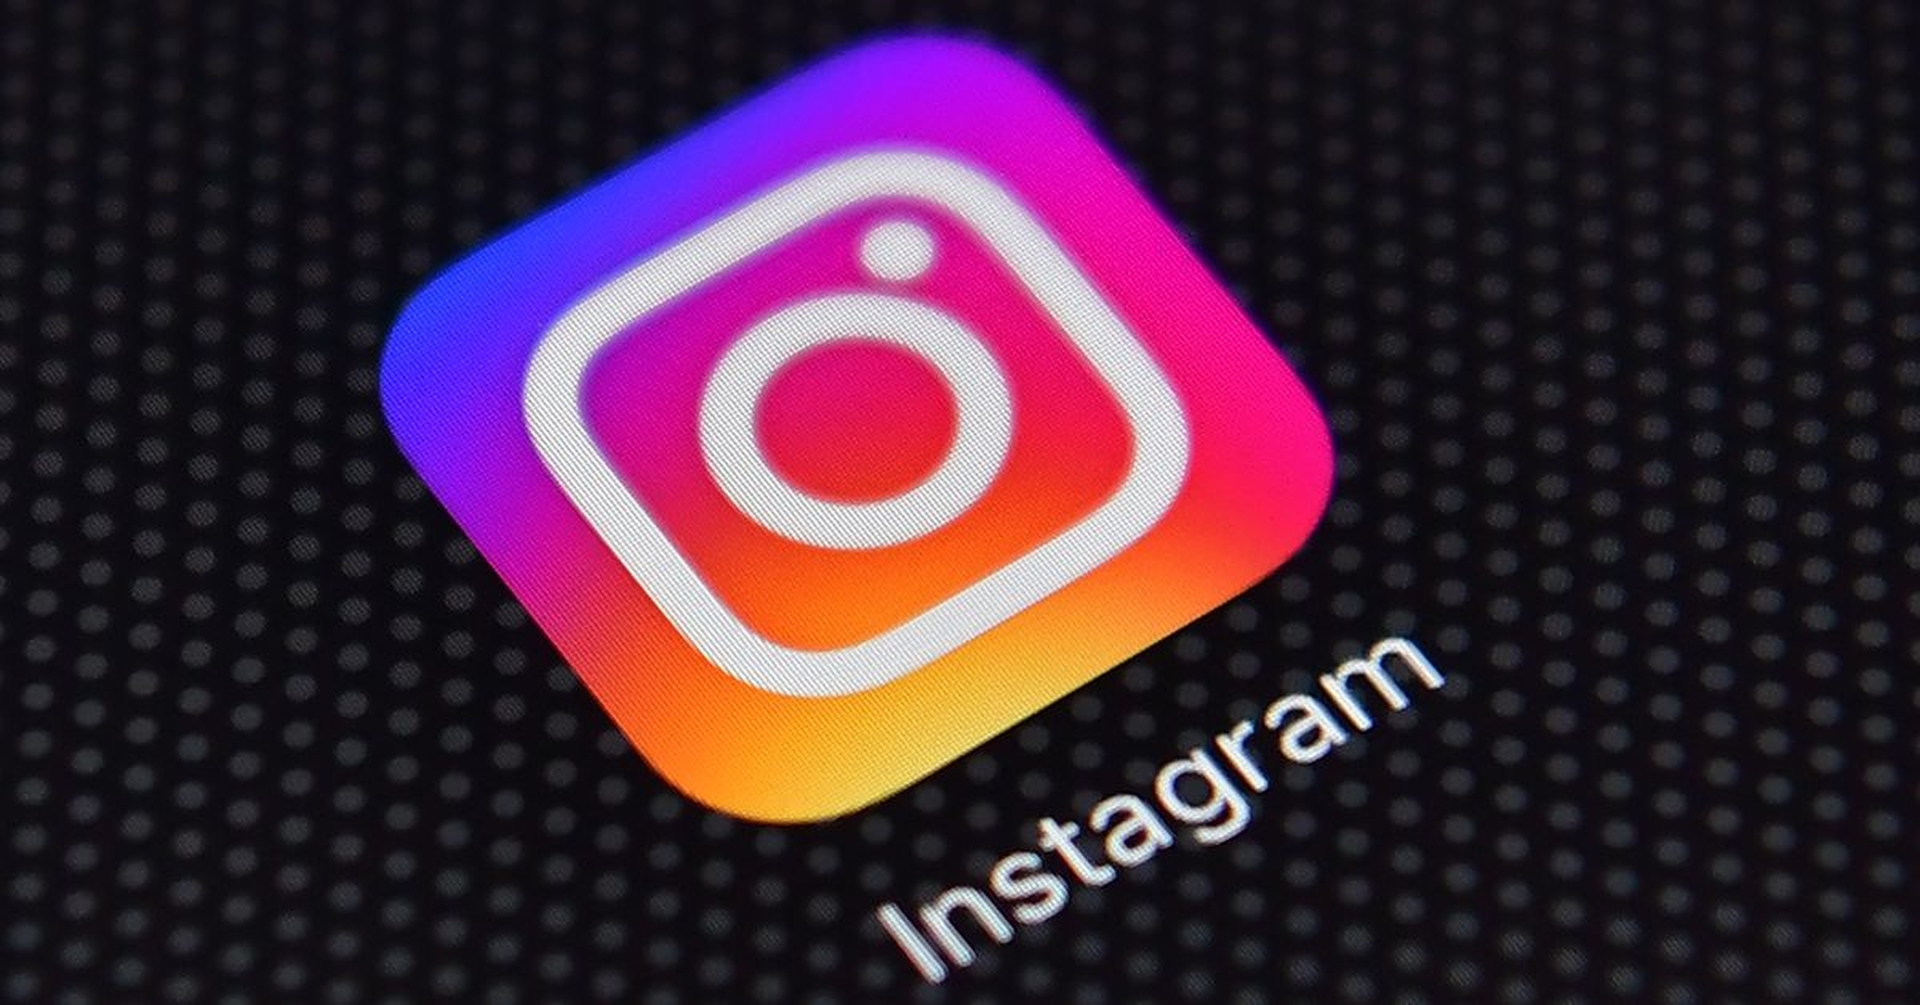 In this article, we are going to go over what is pin post to profile on Instagram and how to pin post to profile Instagram, so you can utilize this latest feature.